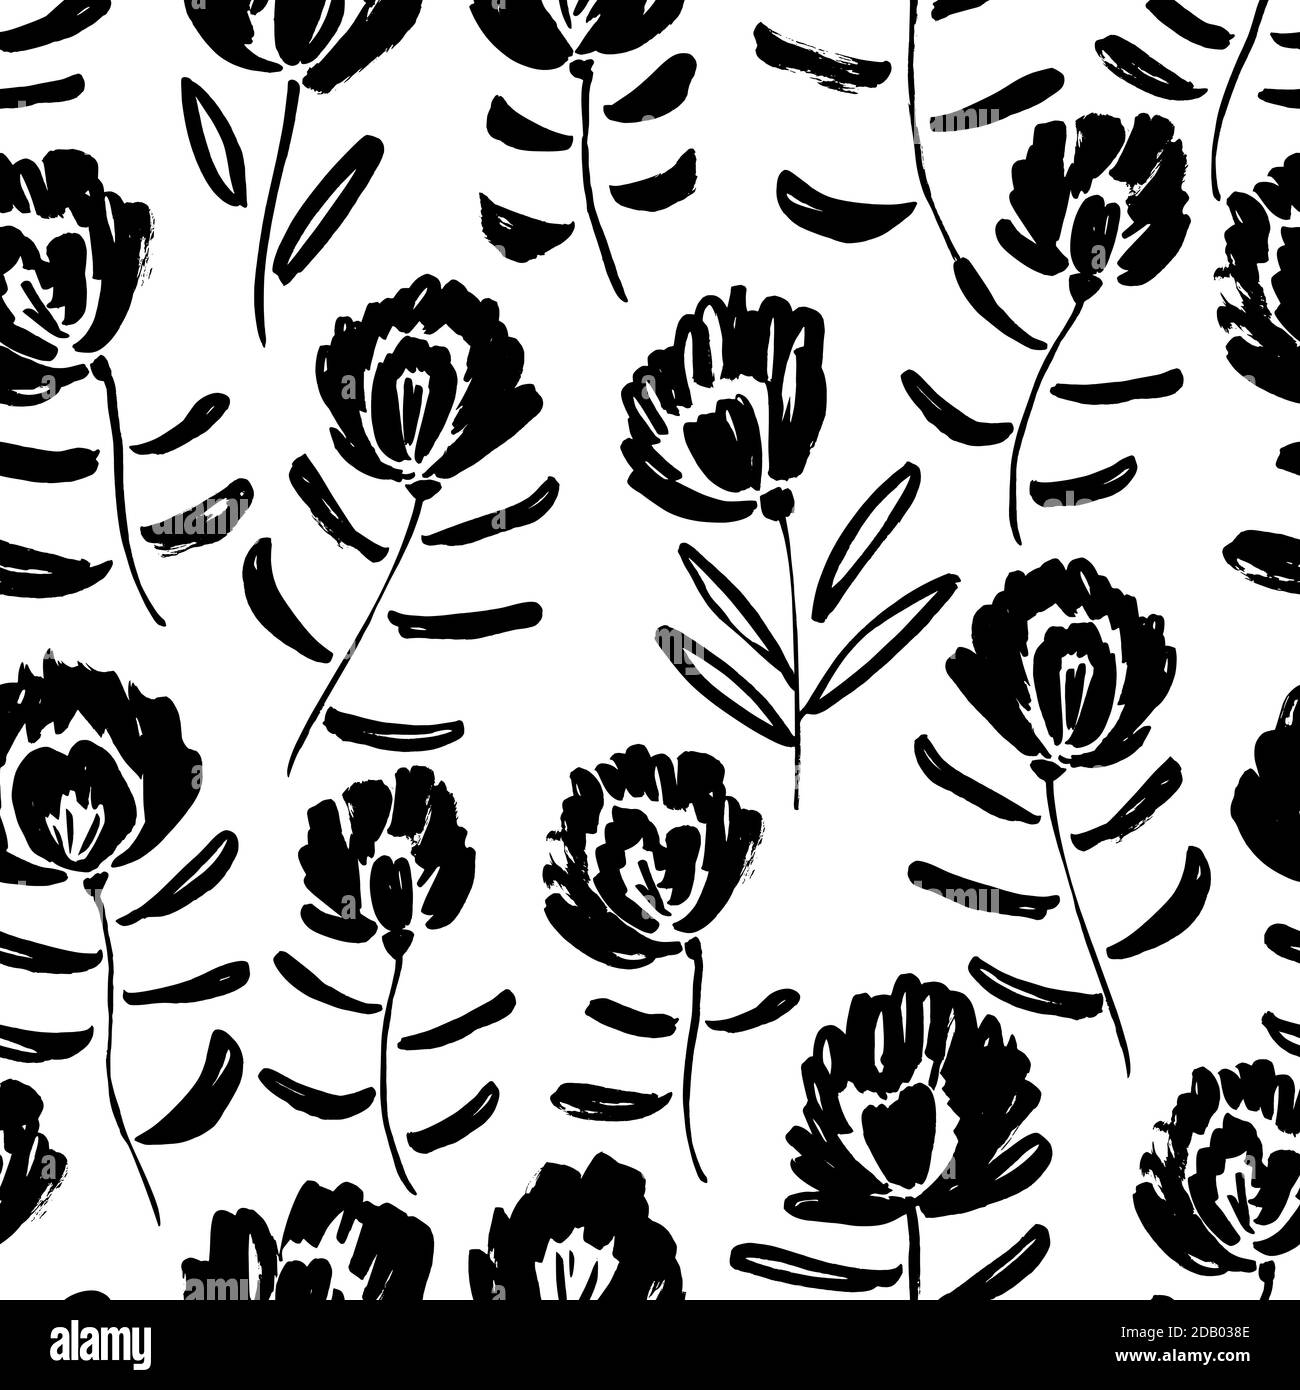 Hand drawn flower branches vector seamless pattern Stock Vector